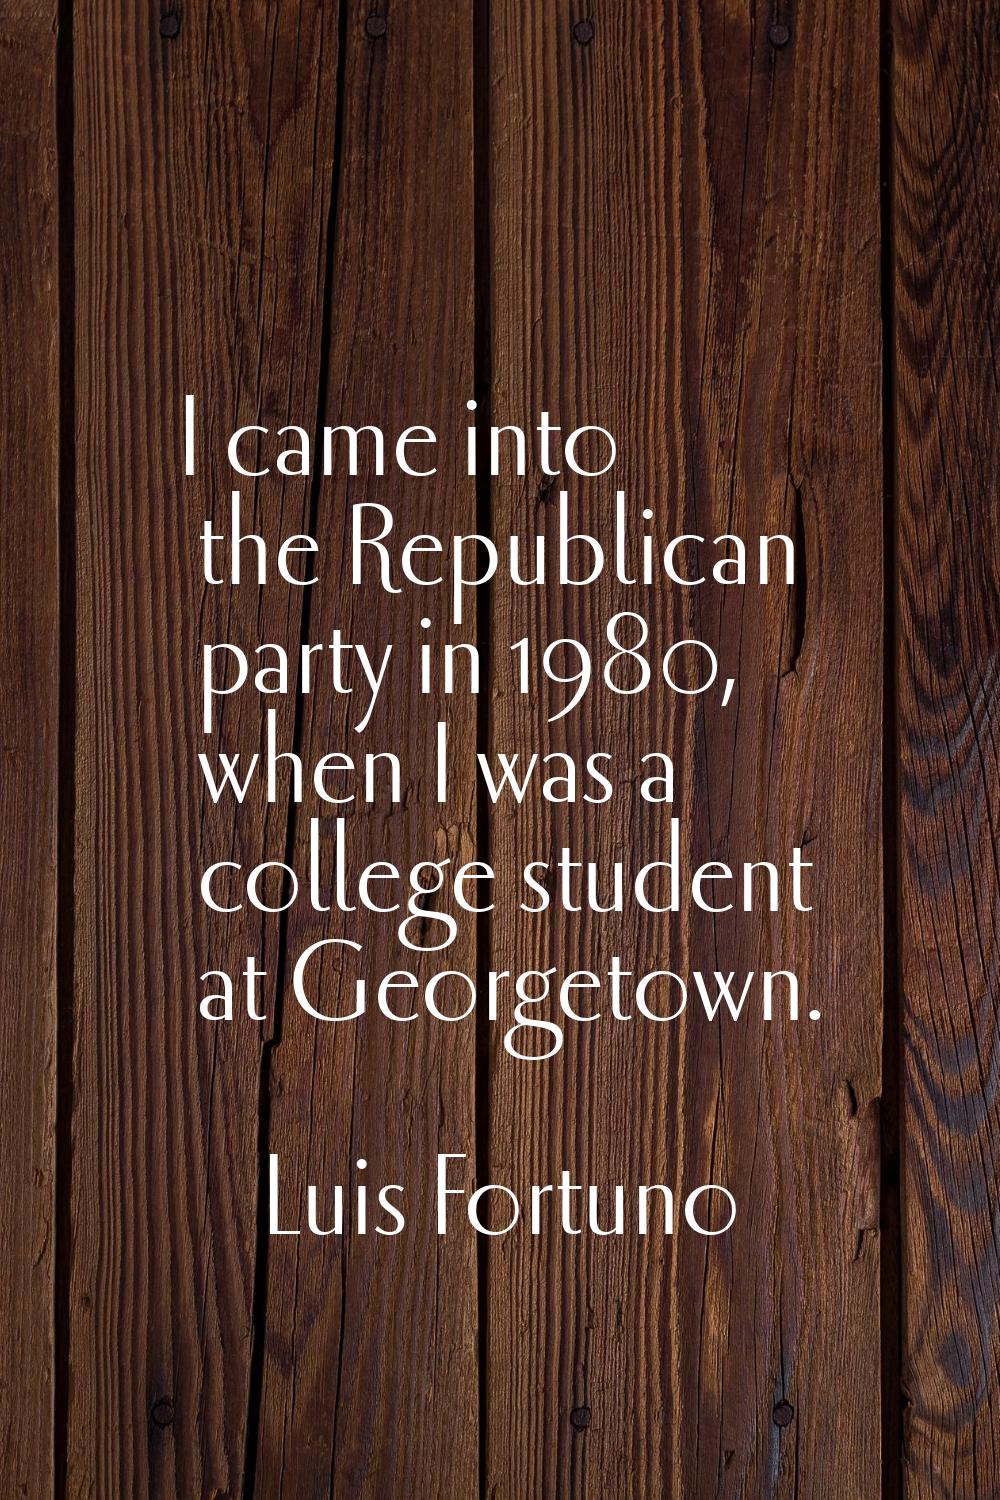 I came into the Republican party in 1980, when I was a college student at Georgetown.